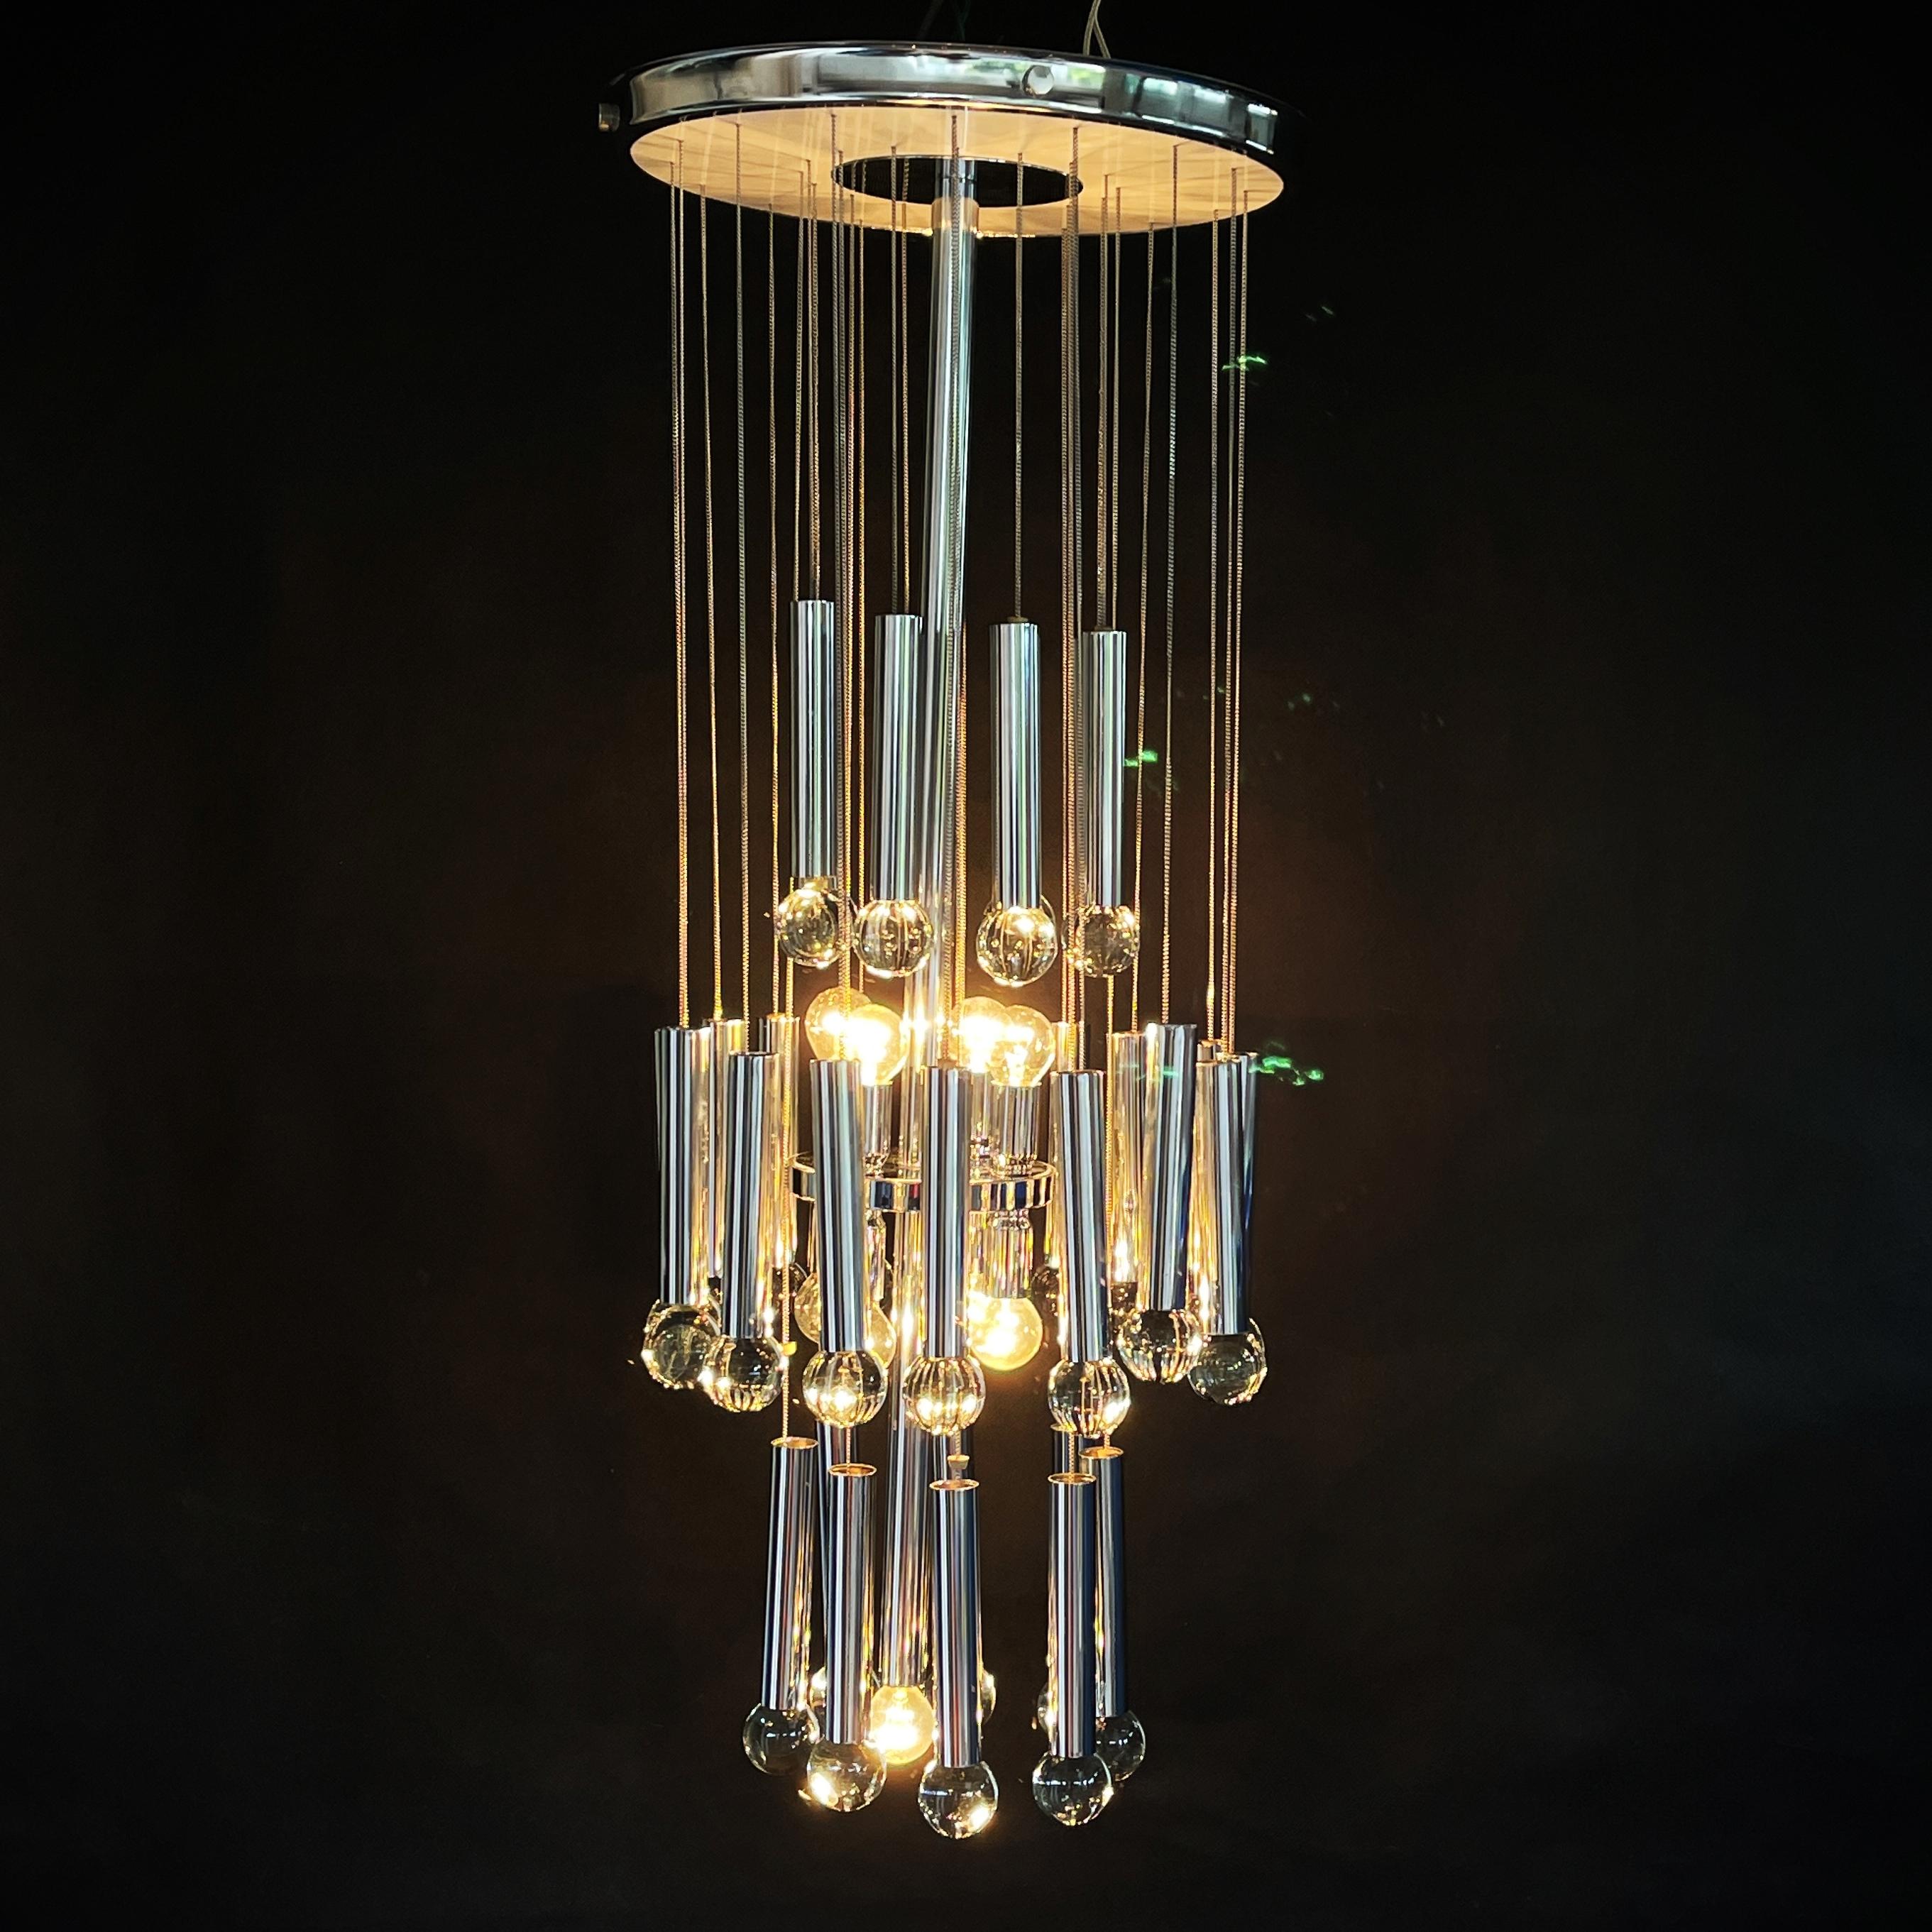 Beautiful Italian chandelier from the 1960s by Gaetano Sciolari.
The chromed frame carries 32 chains with chromed tubes and crystal balls that make a great chandelier.

The hanging lamp is an original and gives a pleasant light.

The lamp has 9